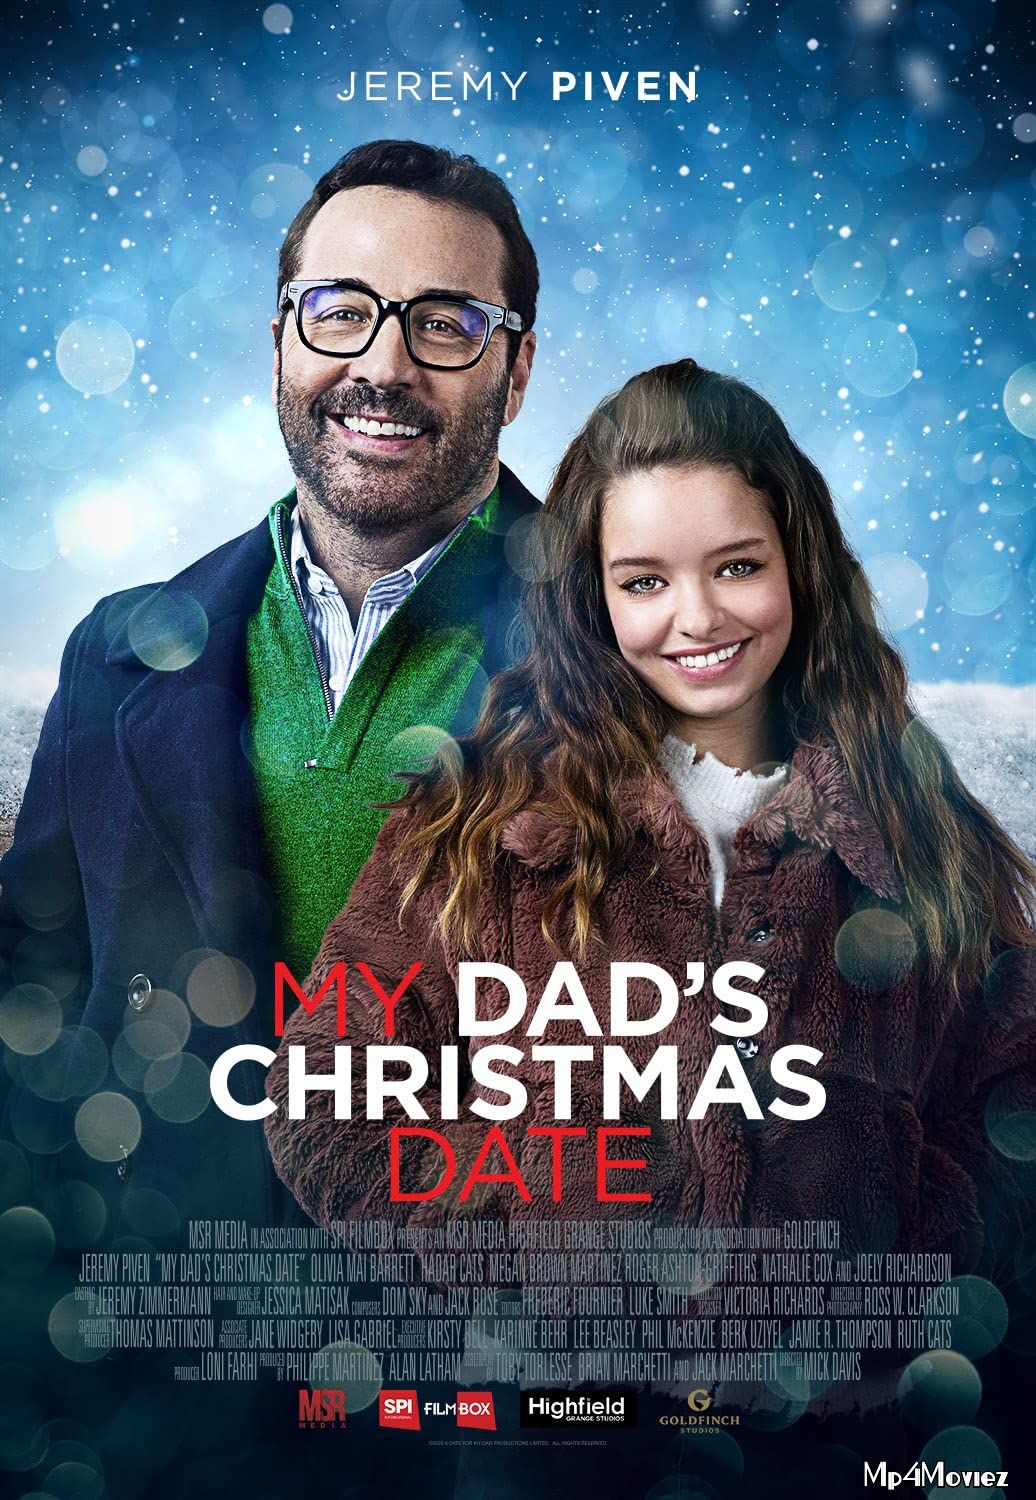 My Dads Christmas Date 2020 English Full Movie download full movie